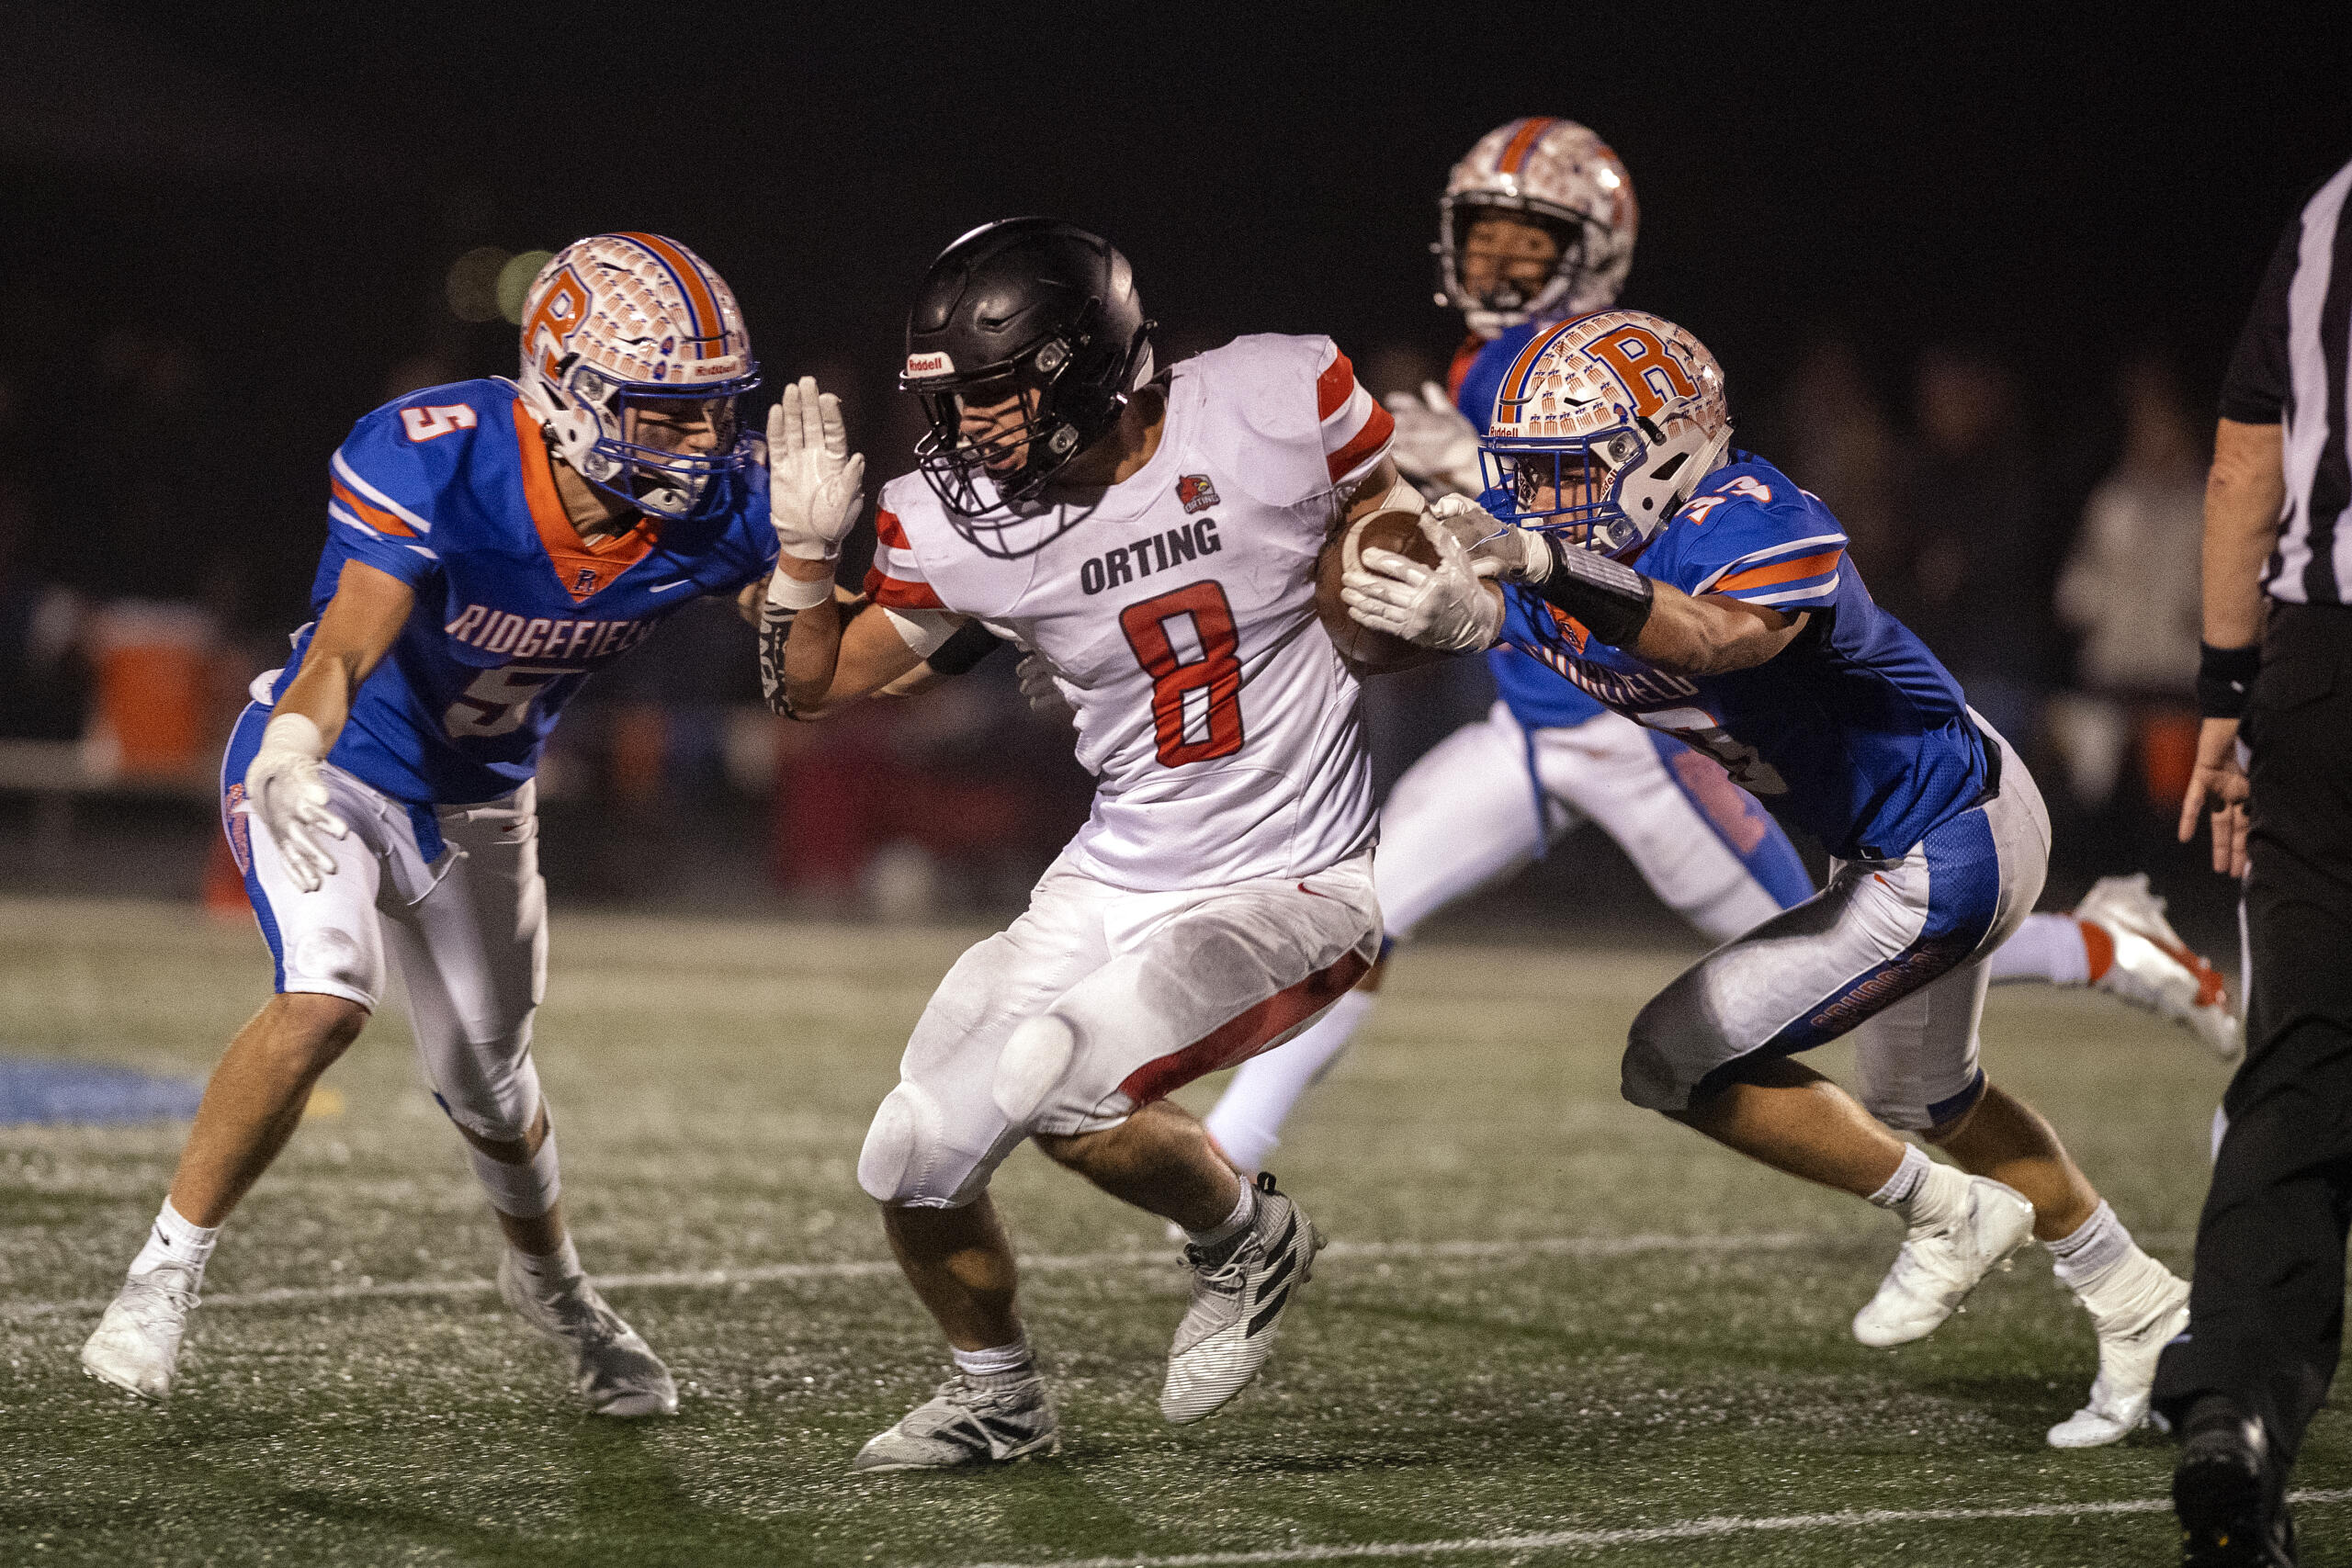 Ridgefield's Ty Snider (5) defends against Orting's Aiden Herd (8) while assisted by teammate Davis Pankow (33) in the second quarter At Ridgefield High School on Saturday night, Nov. 13, 2021.